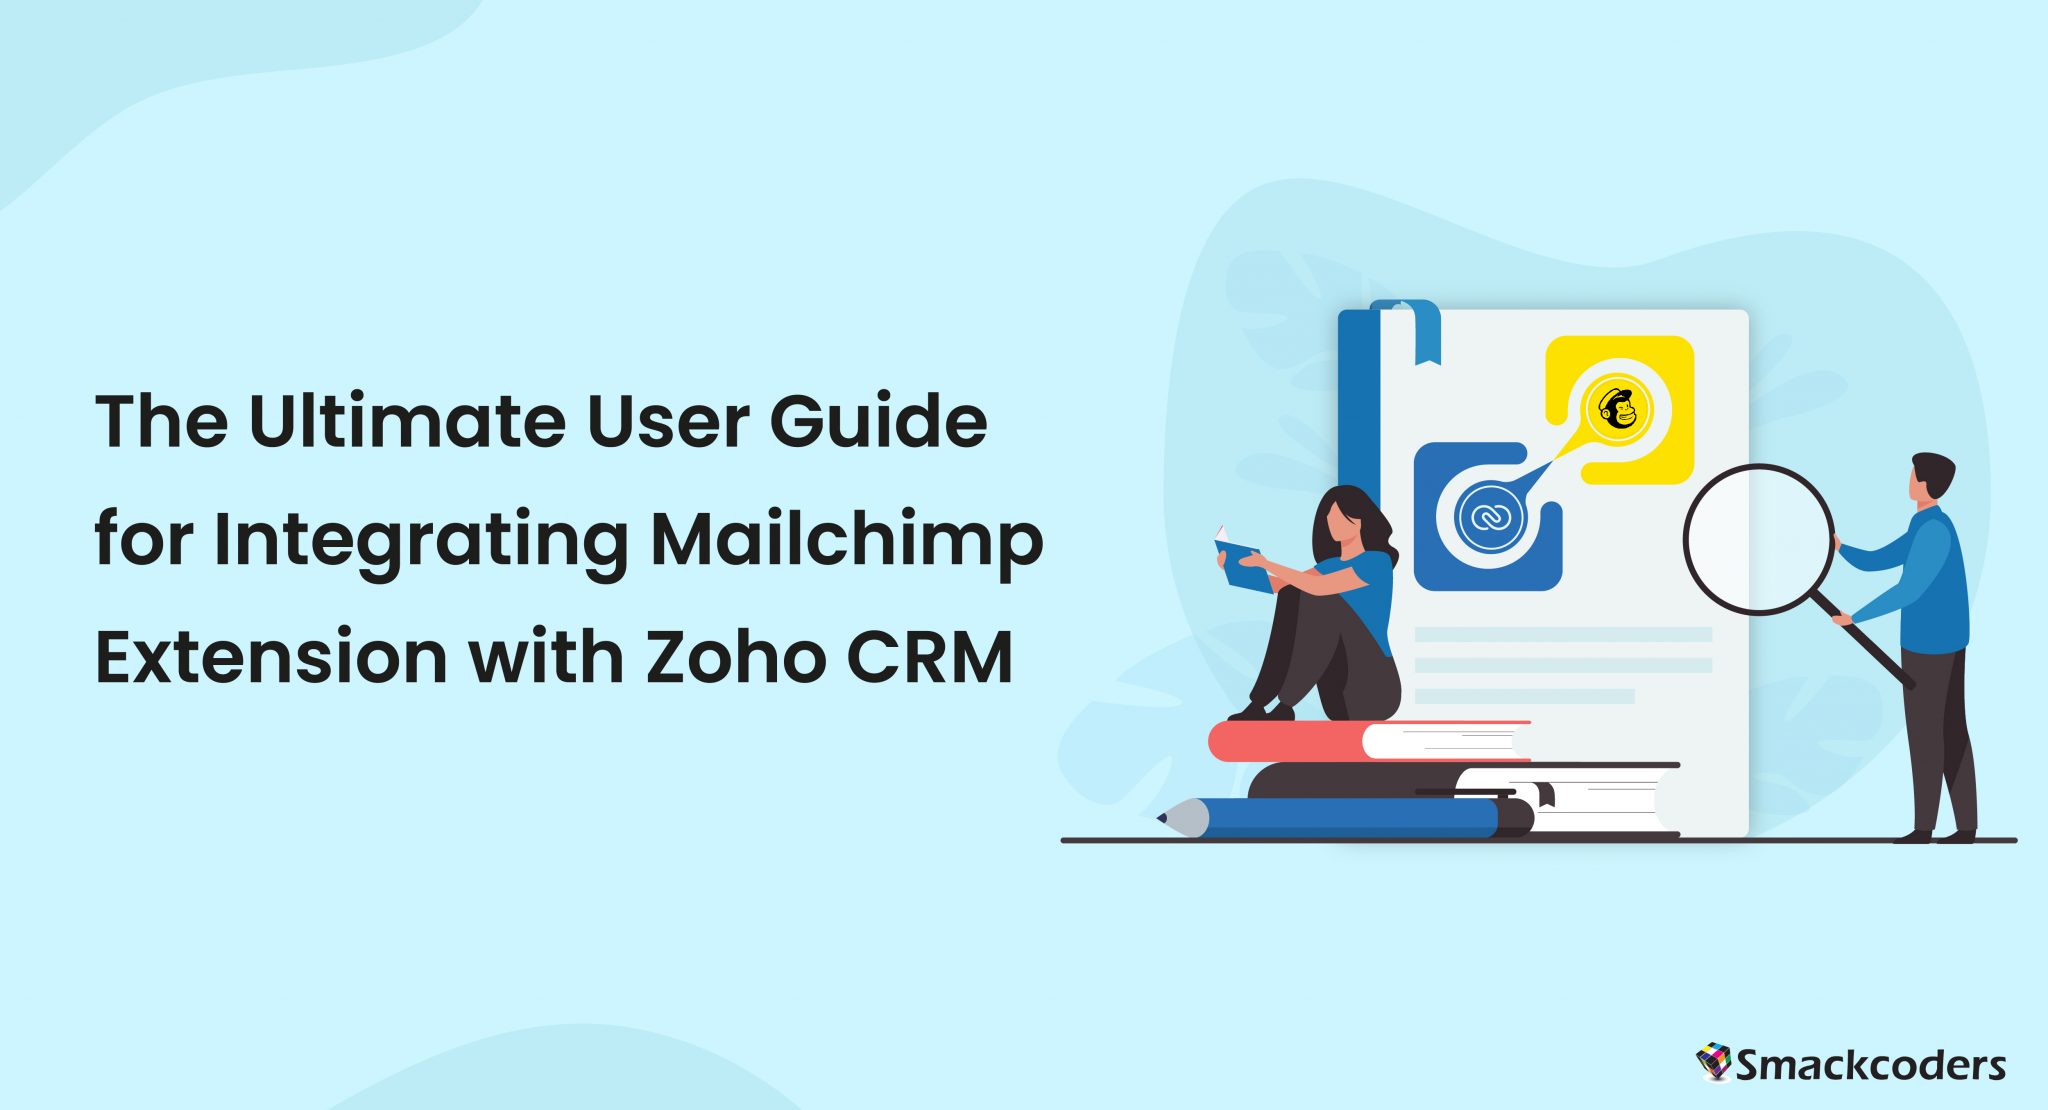 The-Ultimate-User-Guide-for-Integrating-Mailchimp-Extension-with-Zoho-CRM